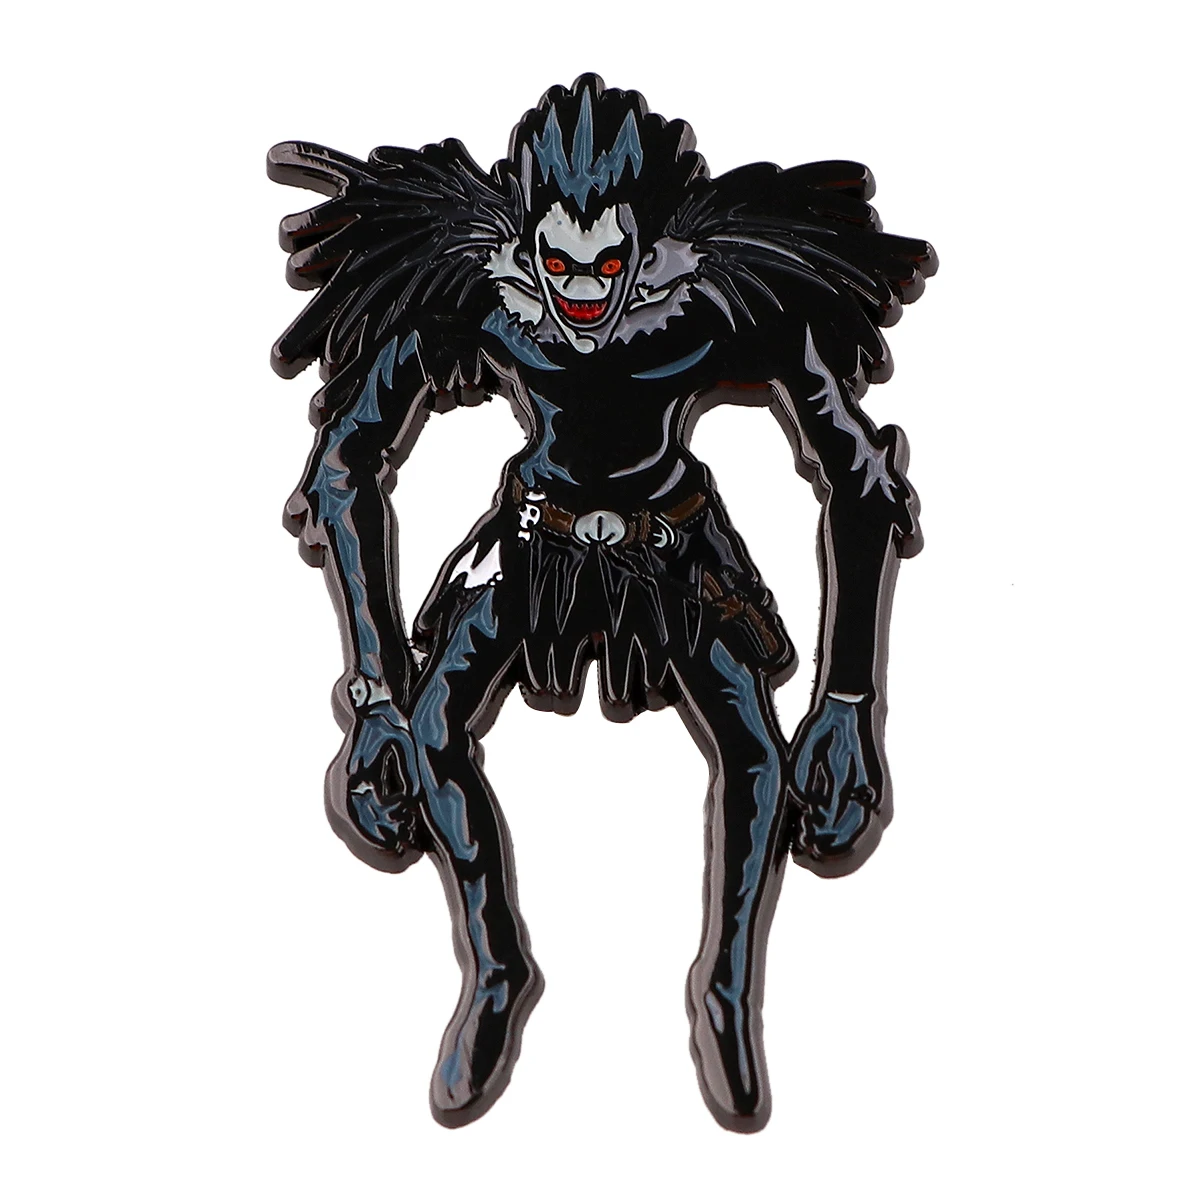 Mange DEATH NOTE Enamelled Brooch Anime Cool Pins Clothing Backpack Lapel Badges Fashion Jewelry Accessories For Friends Gifts